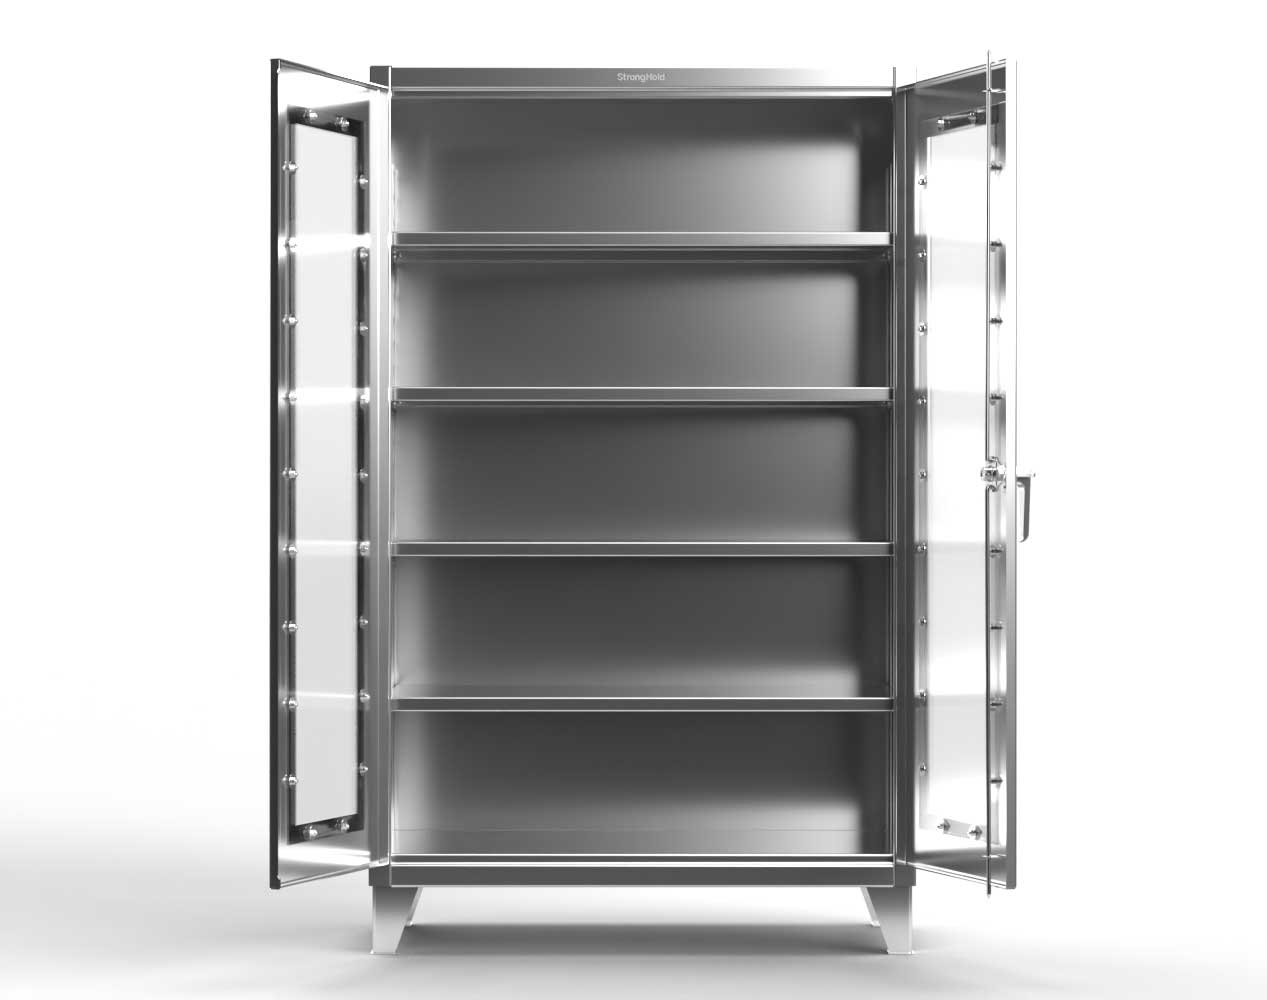 Extreme Duty 12 GA Stainless Steel Scratch Resistant Clearview Cabinet with 4 Shelves - 60 In. W x 24 In. D x 78 In. H